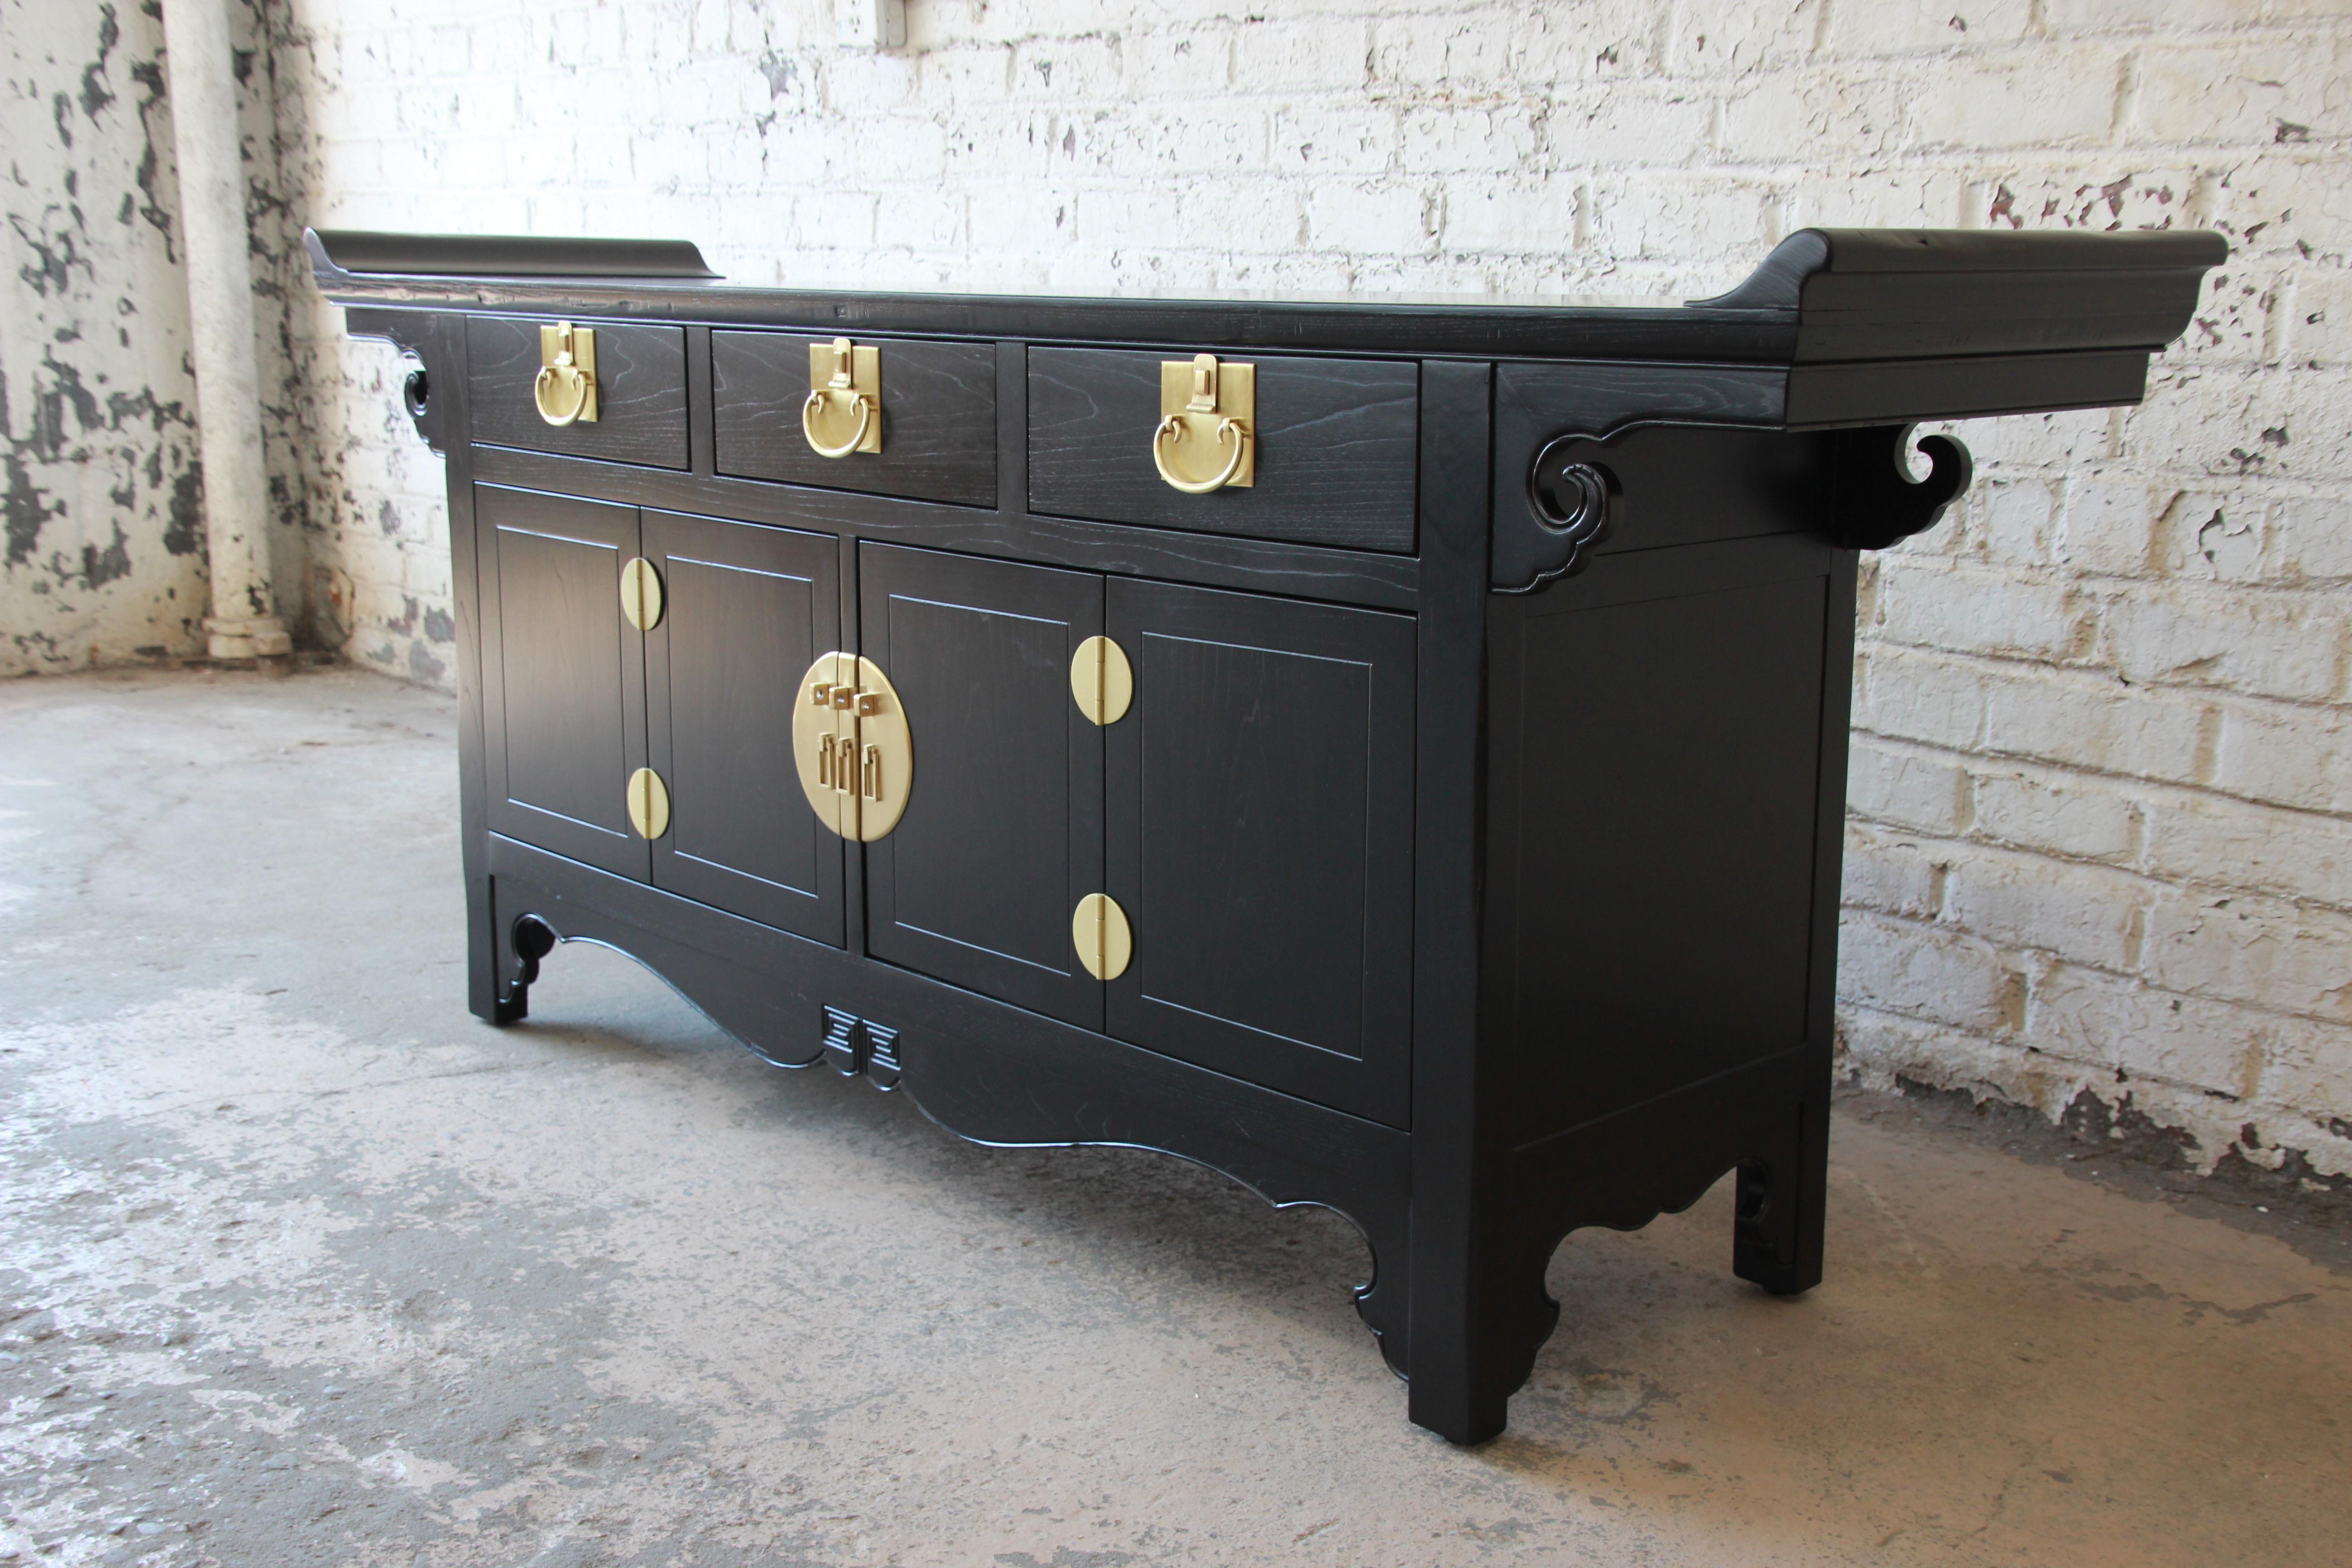 Offering a gorgeous black lacquered chinoiserie sideboard credenza from the Far East collection by Michael Taylor for Baker Furniture. The sideboard features a beautiful Asian design and original brass hardware. It offers ample room for storage,